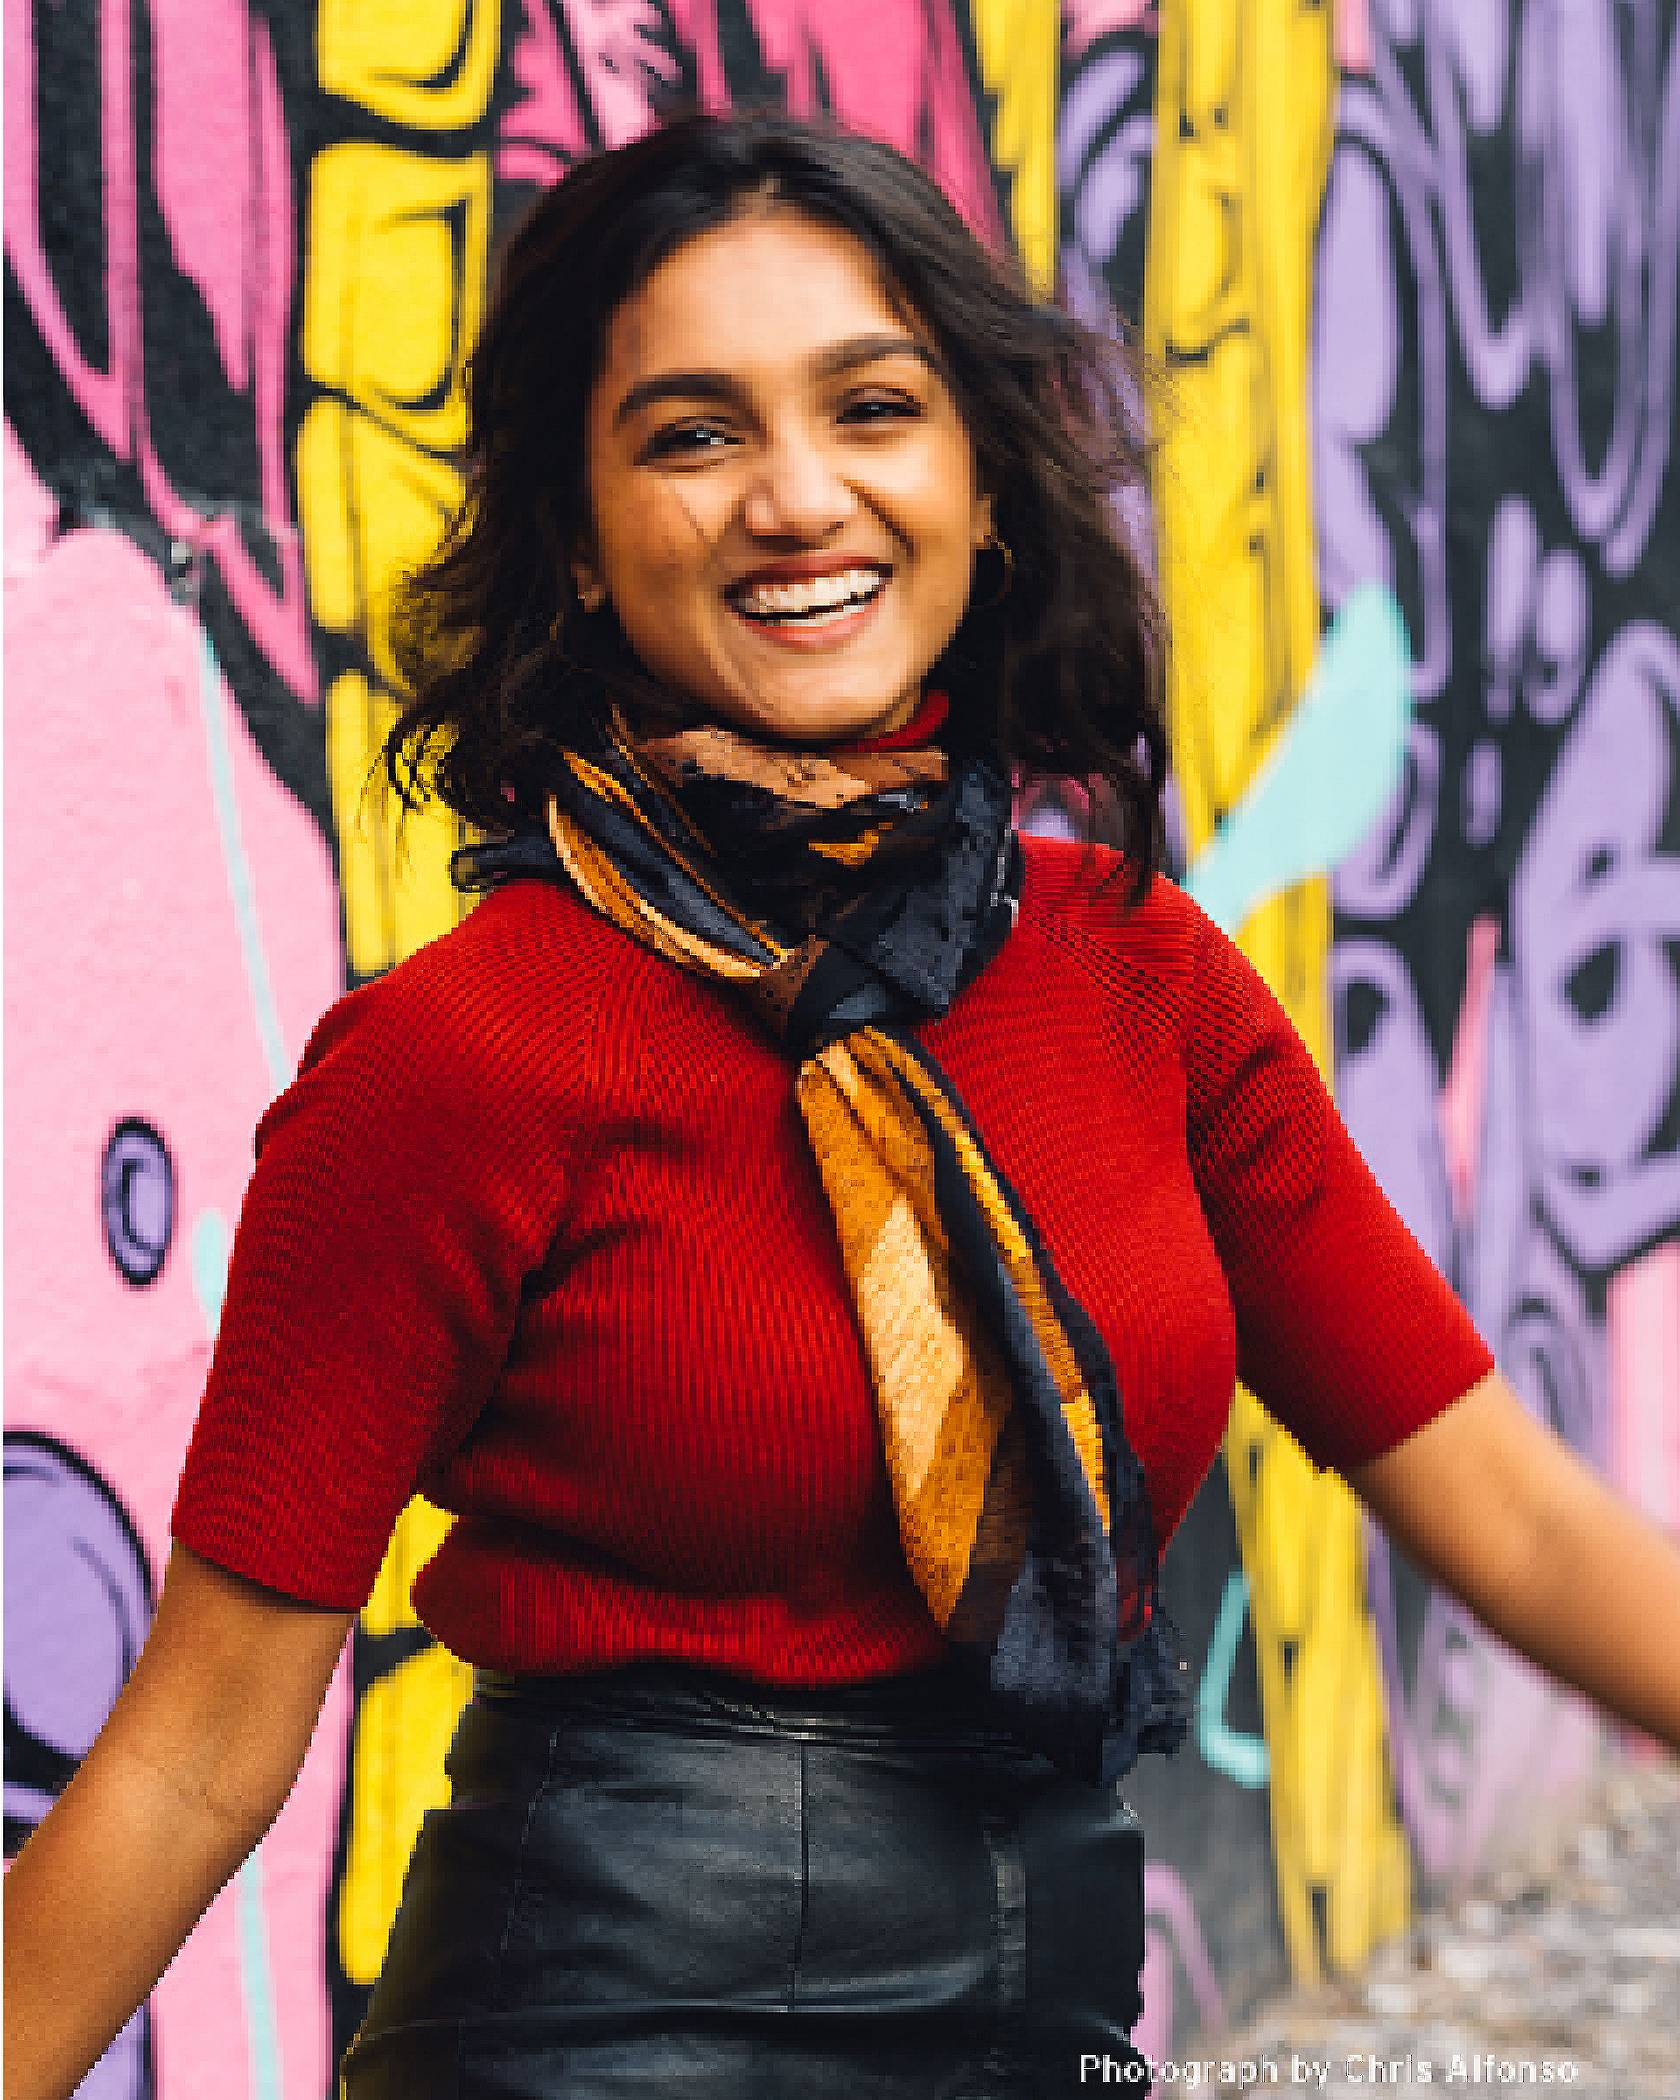 Portrait of Tahia Islam smiling in front of a wall of street art.